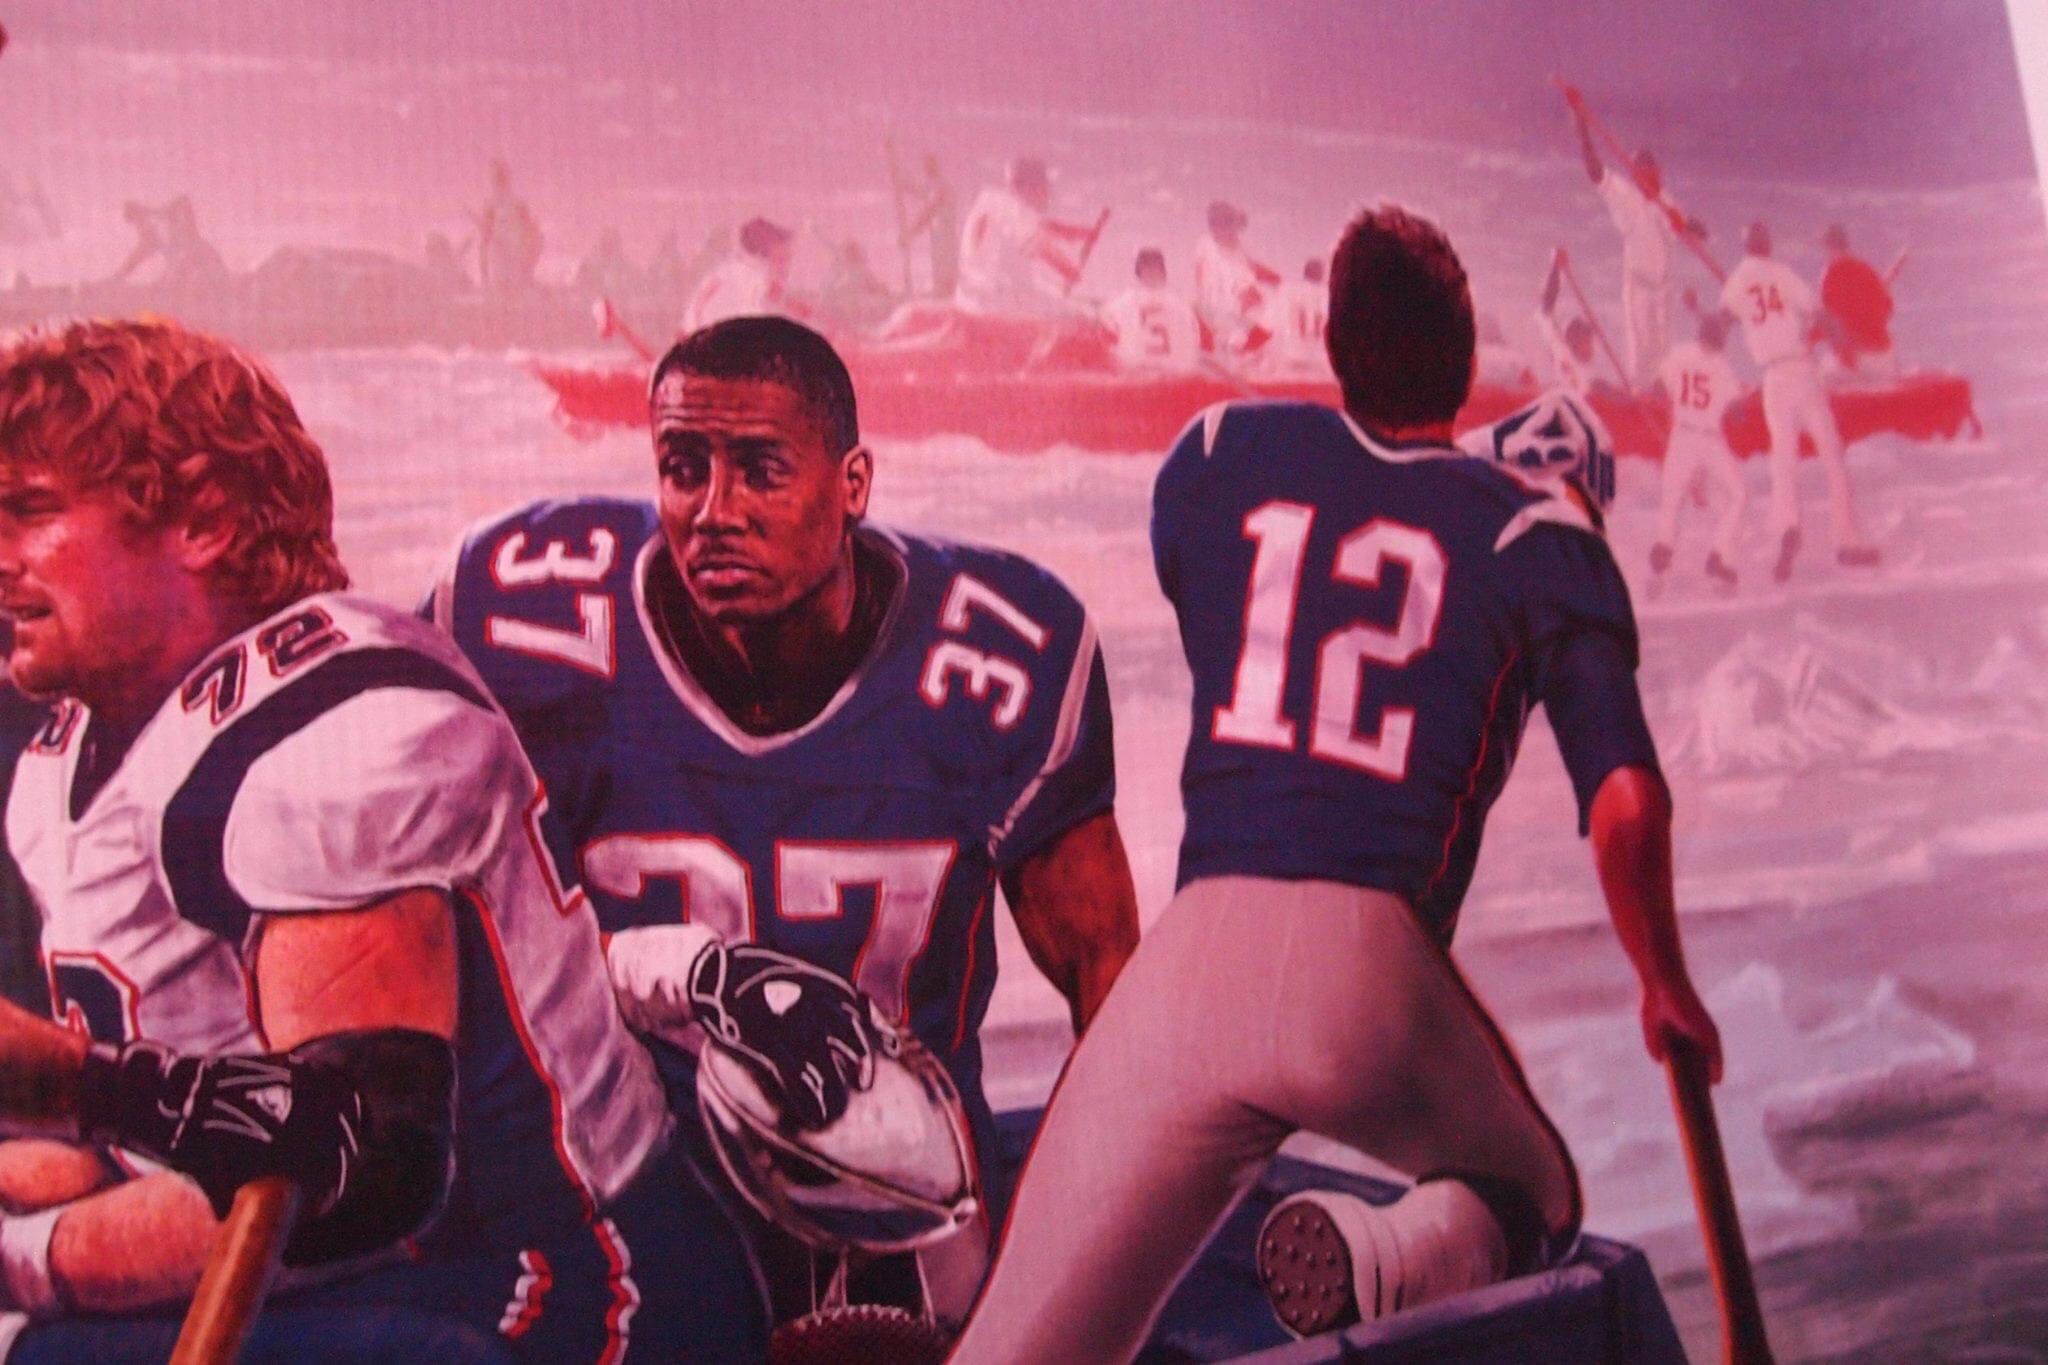 Patriots Canvas Banner “Crossing The Charles”